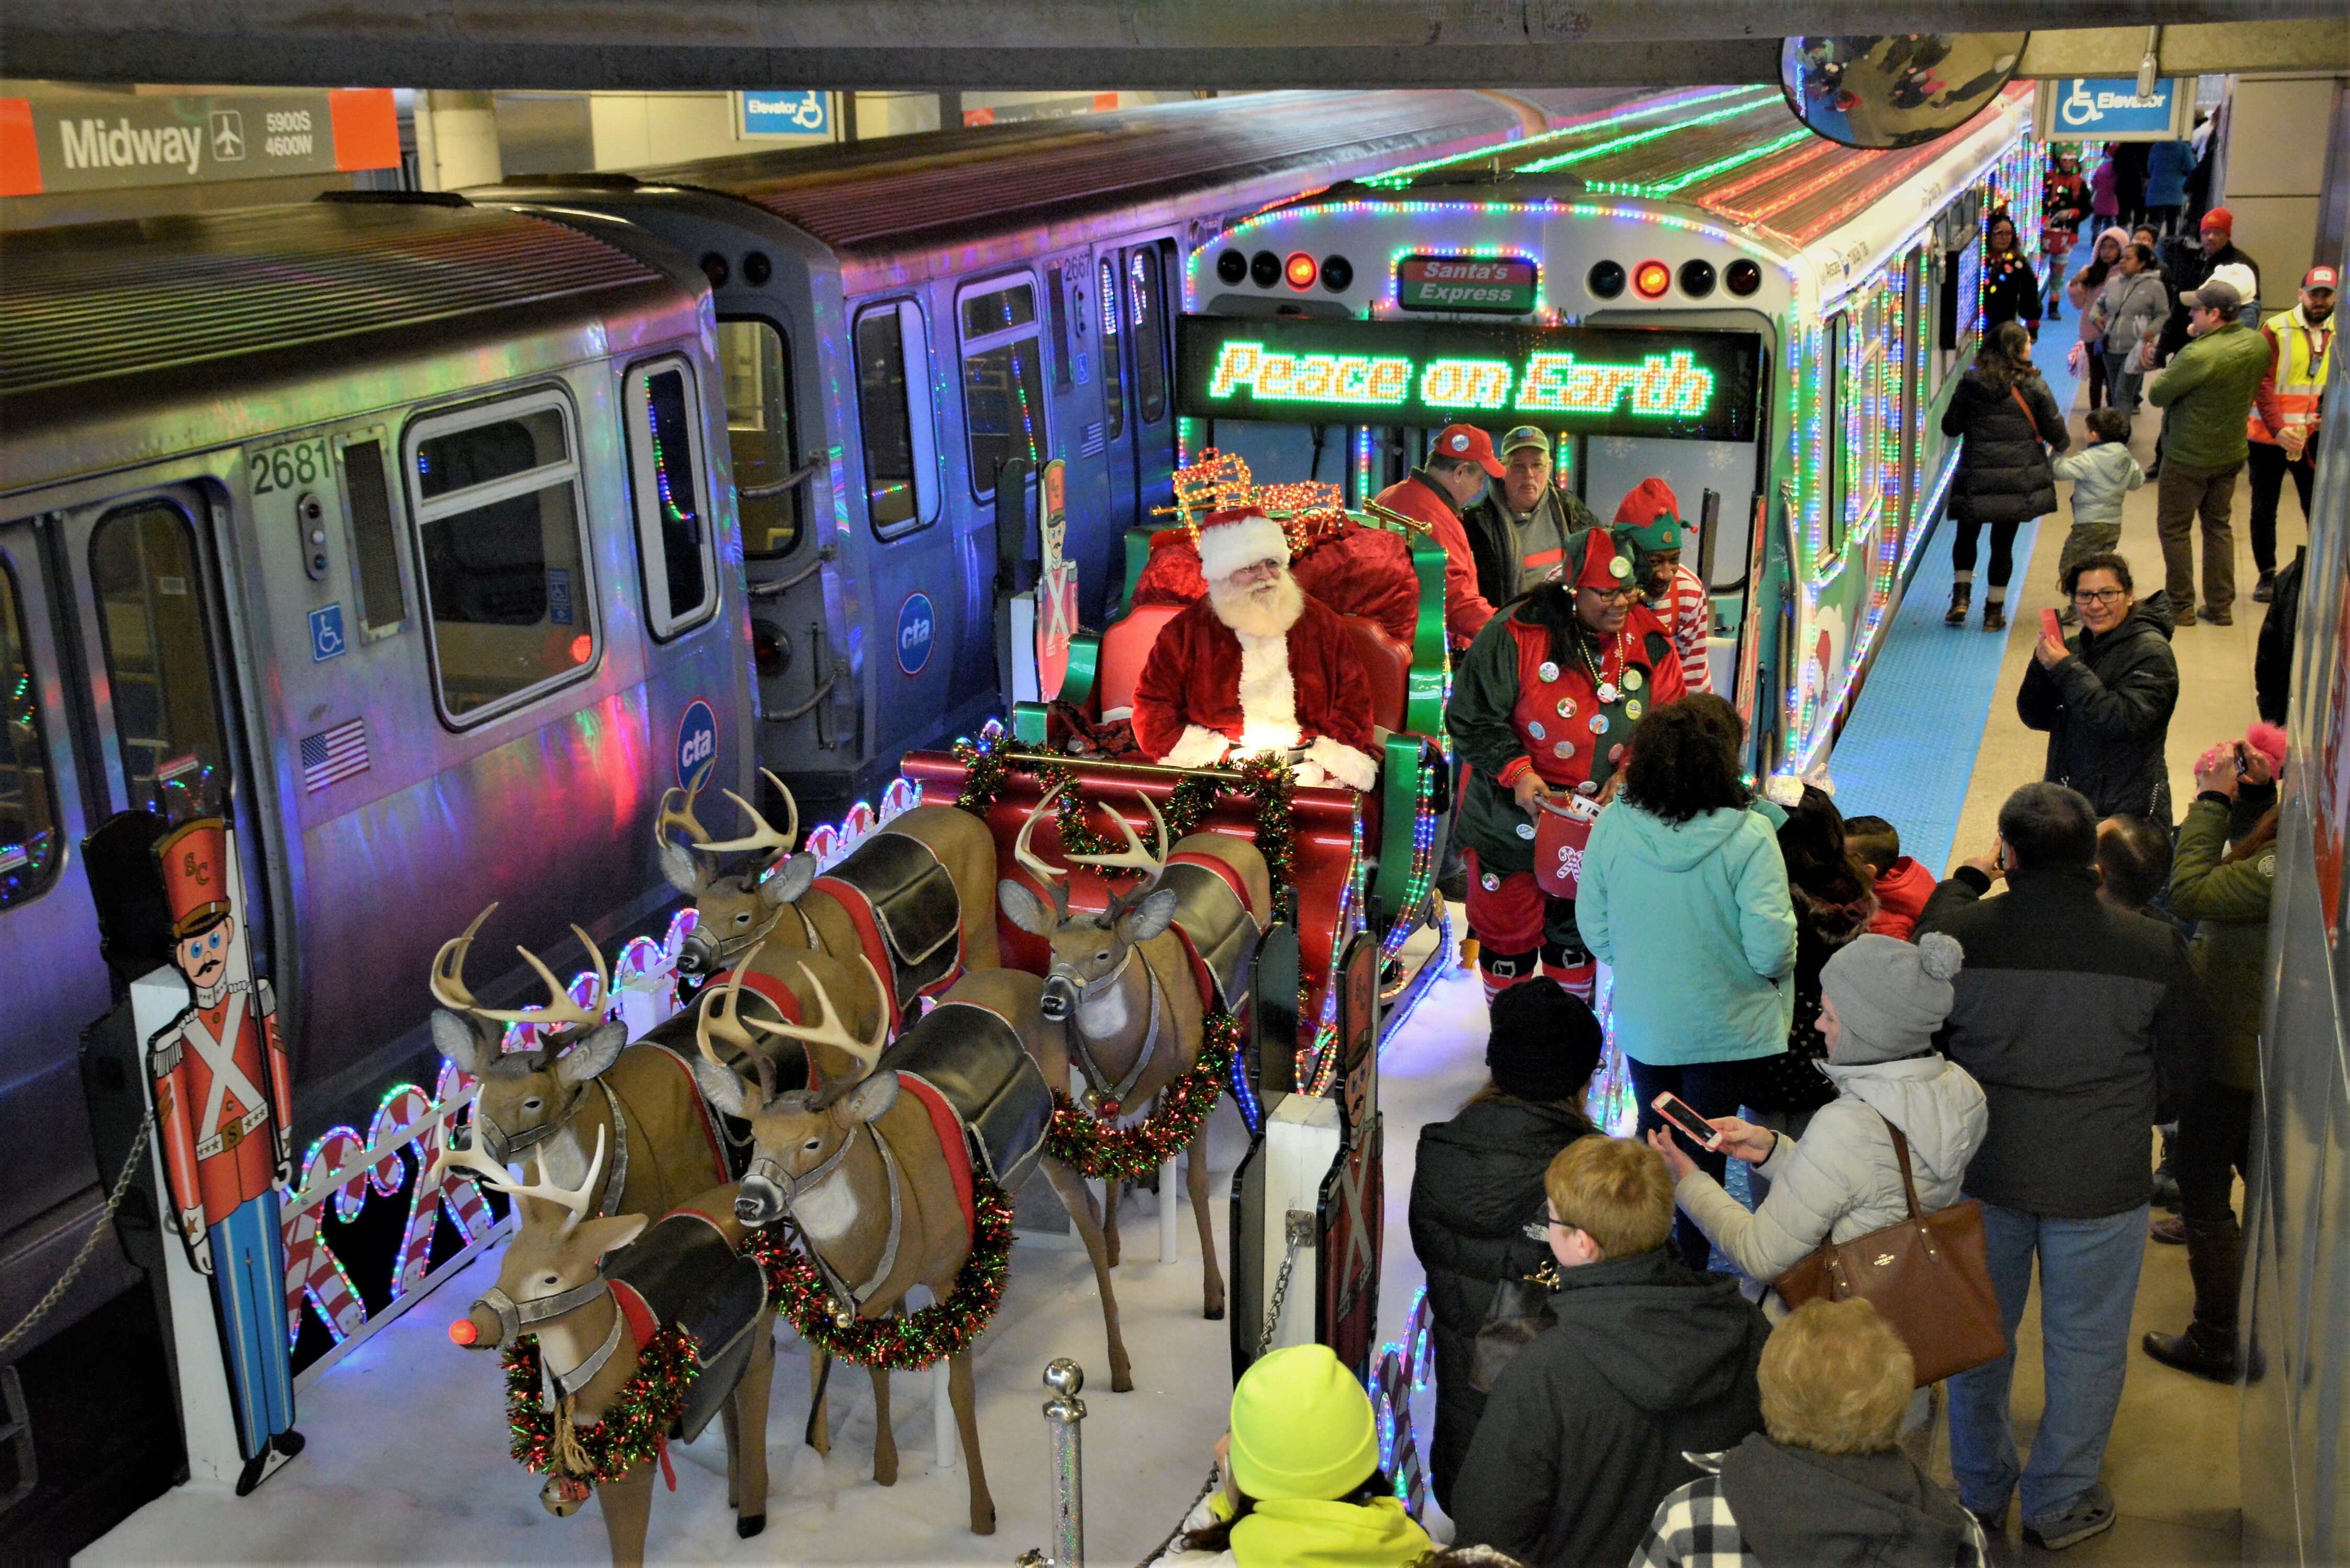 CTA, Metra Release Holiday Train Schedules. Here’s Where and When You’ll Be Able to Hop on Board – NBC Chicago